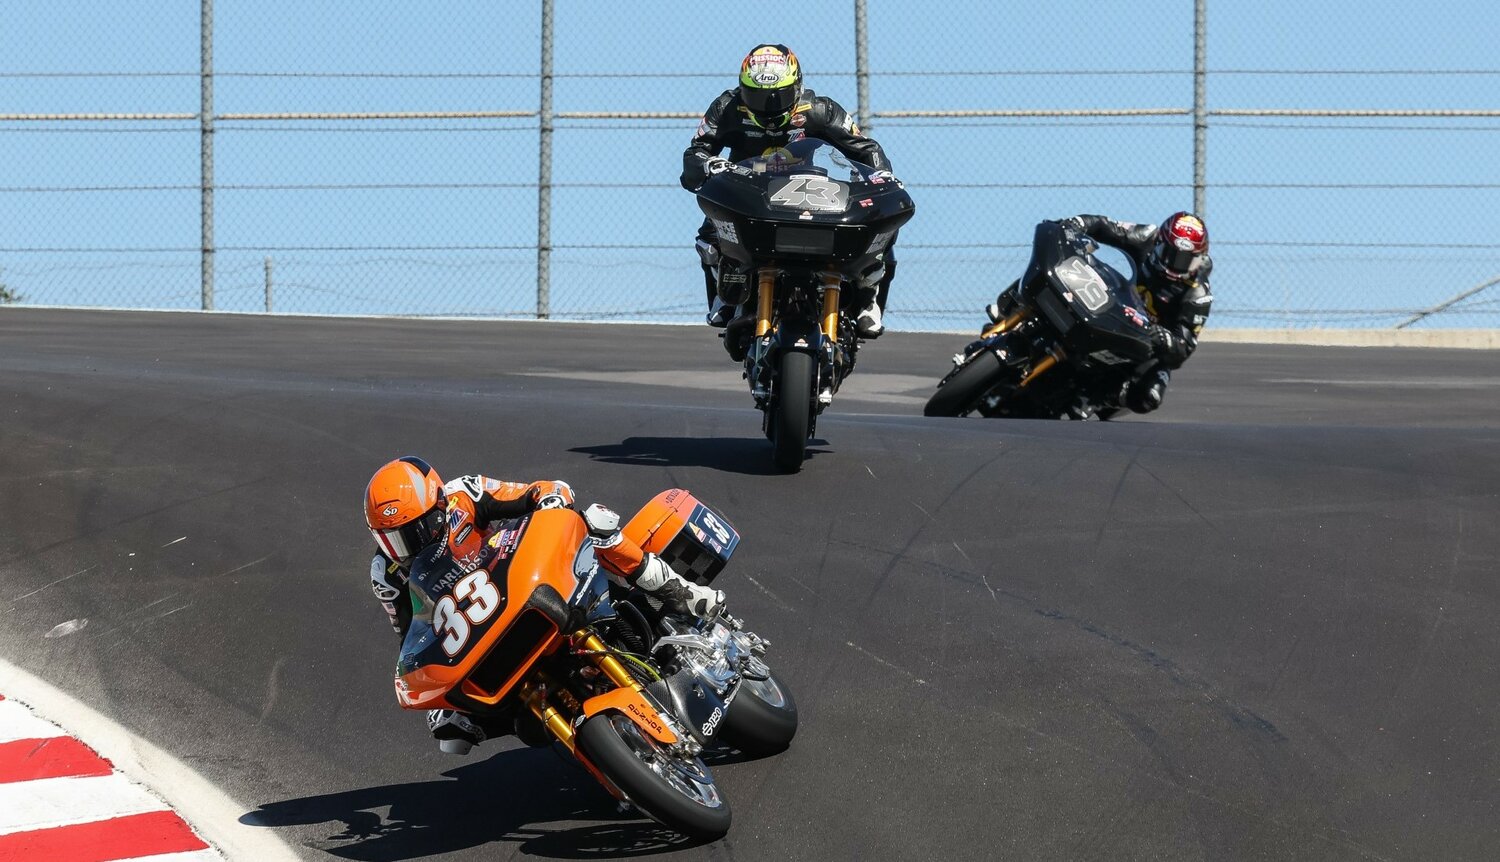 Kyle Wyman (#33) of Harley Davidson's Screamin' Eagle Racing Team negotiating a turn at the 2023 'King of the Baggers' series.